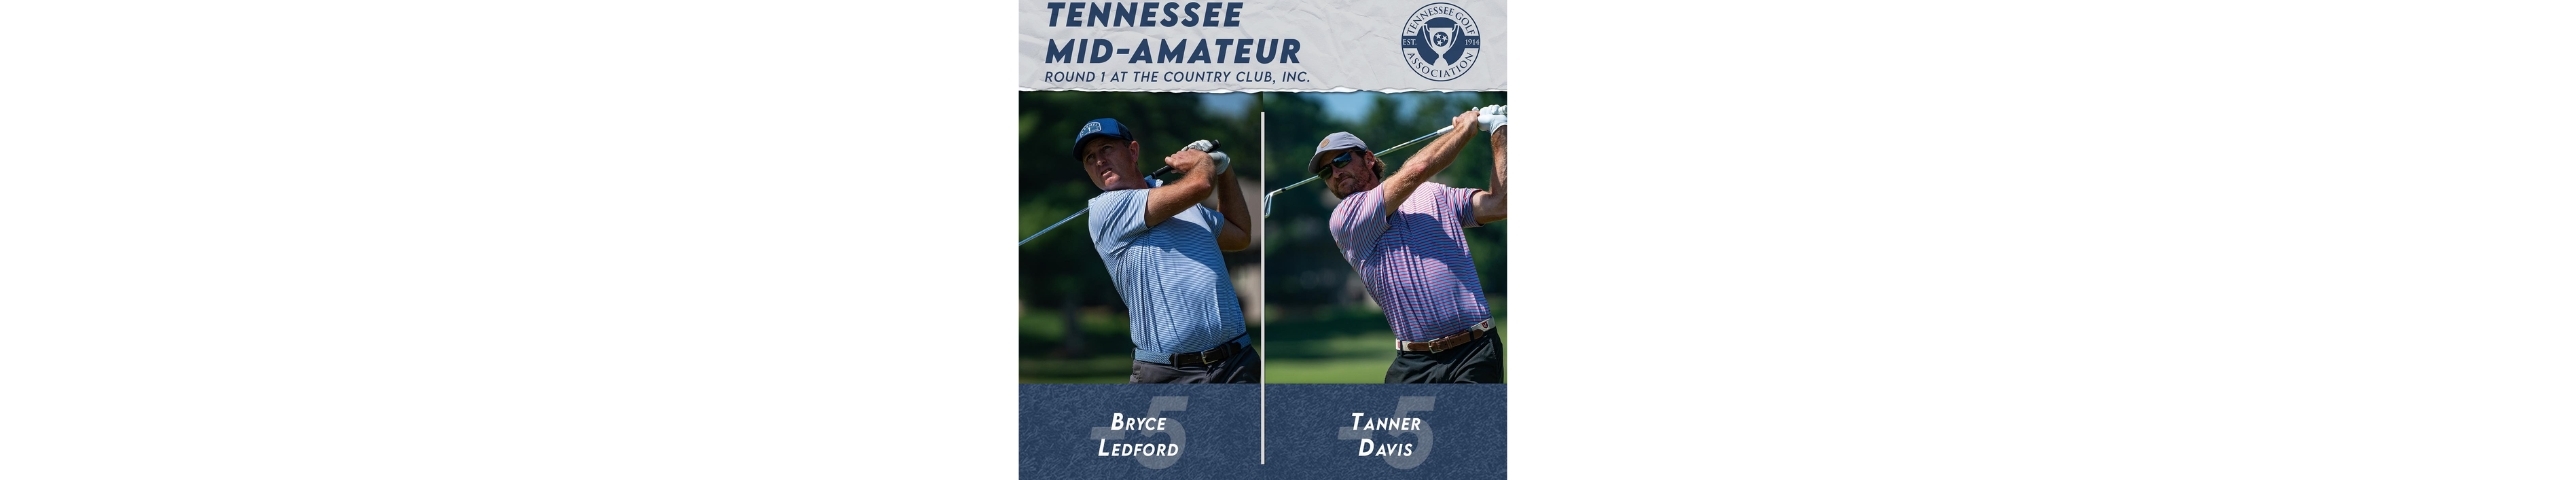 Bryce Ledford Tennessee Mid-Amateur Championship played at The Country Club